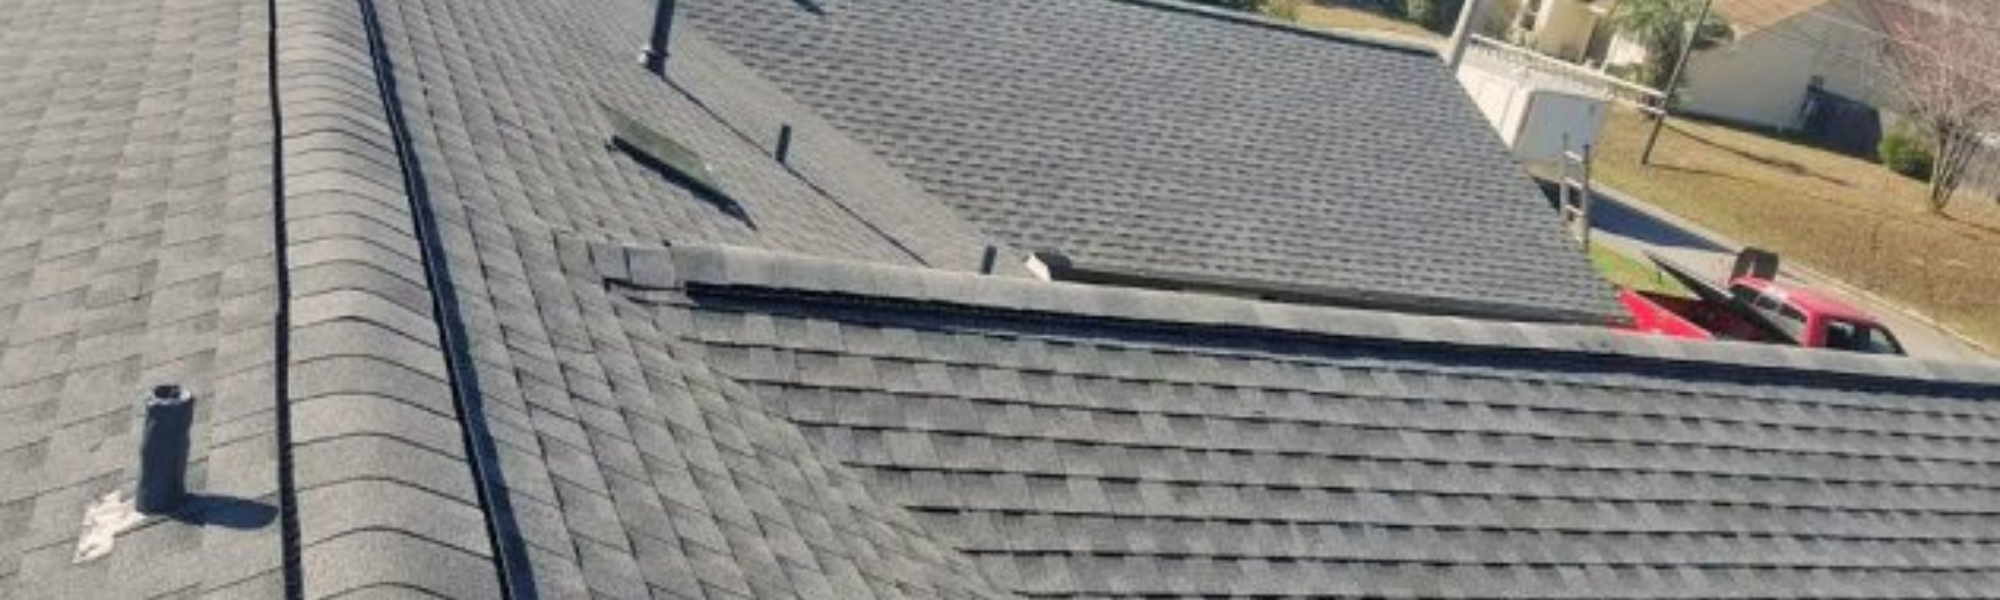 6 common roof leaks and how to handle them